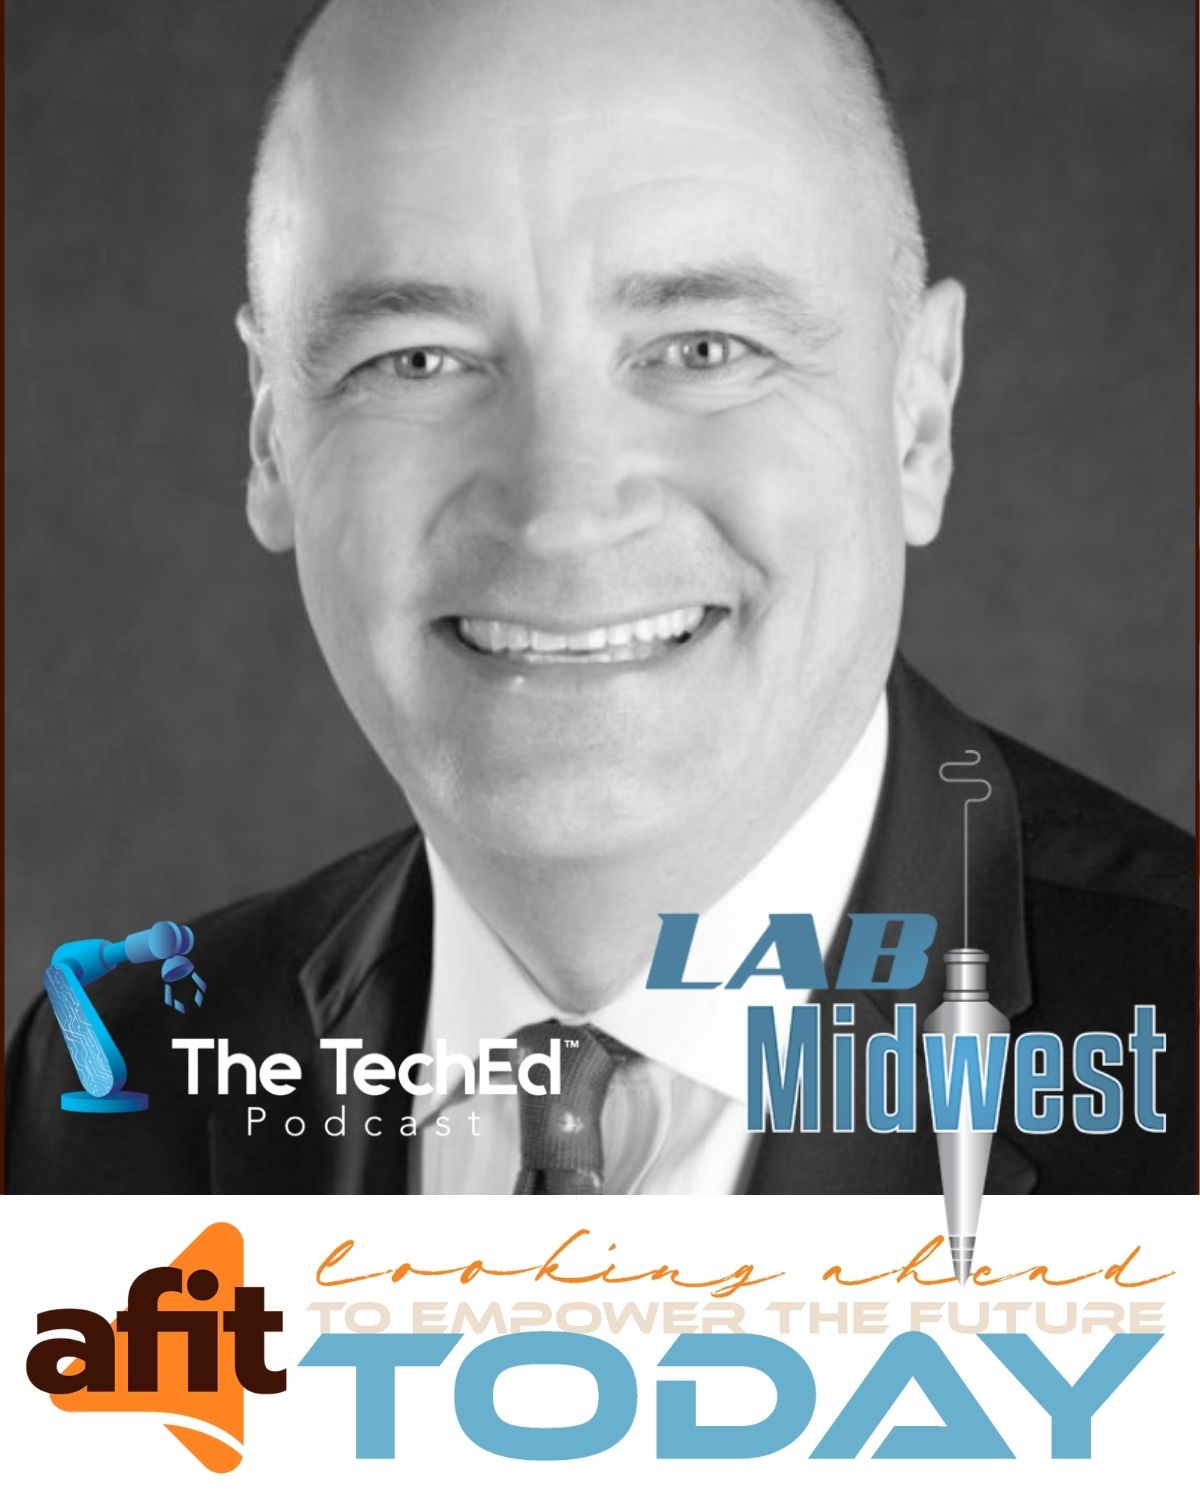 LAB Midwest is a 2024 Learning Partner